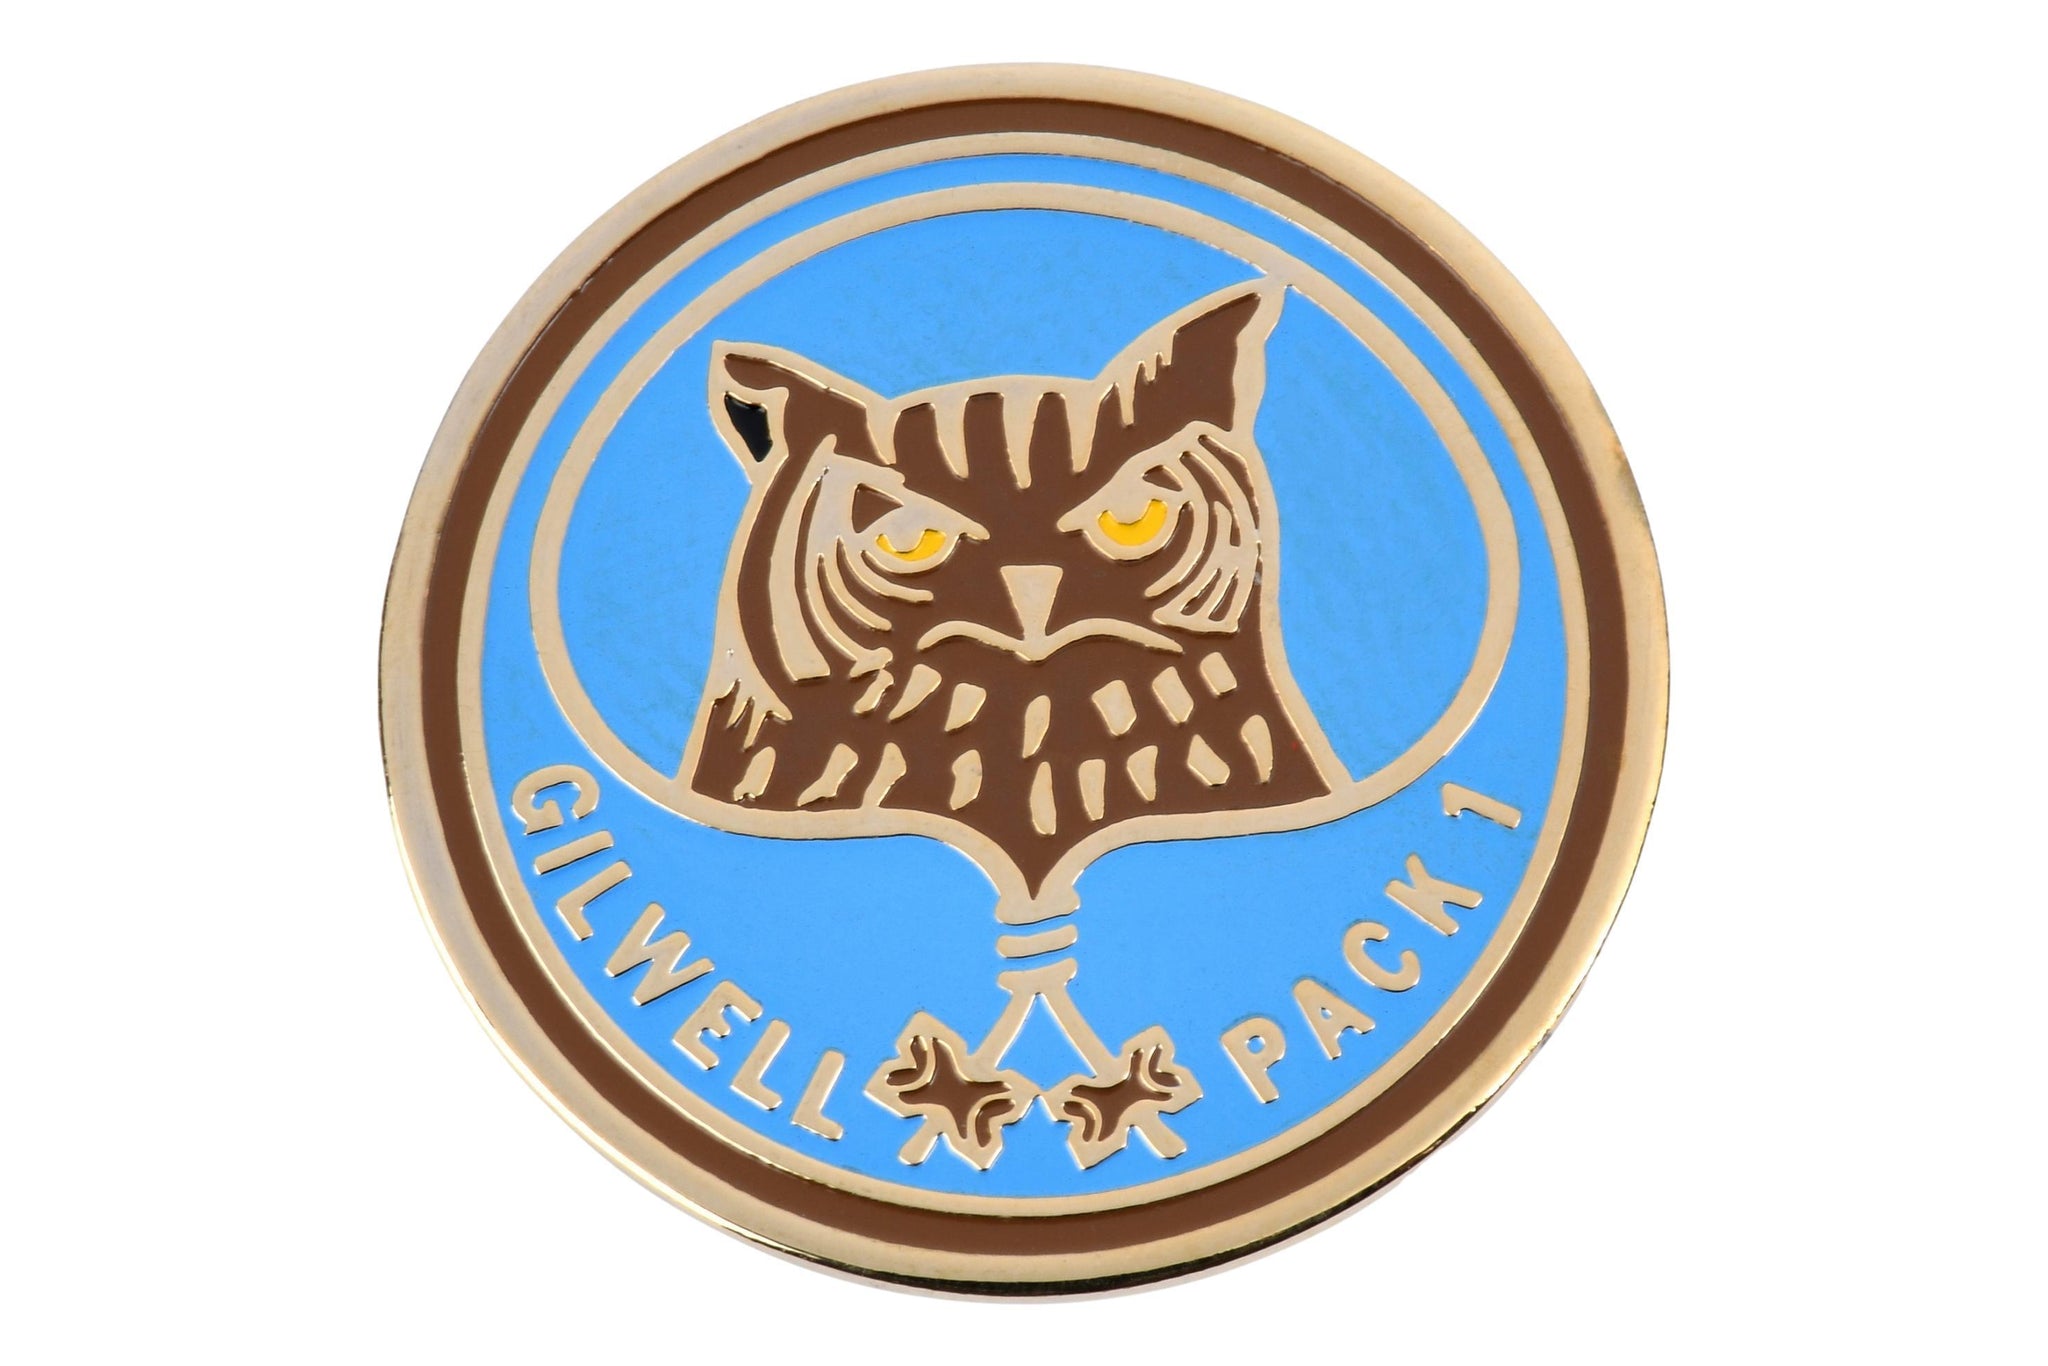 Owl Gilwell Pack 1 Pin